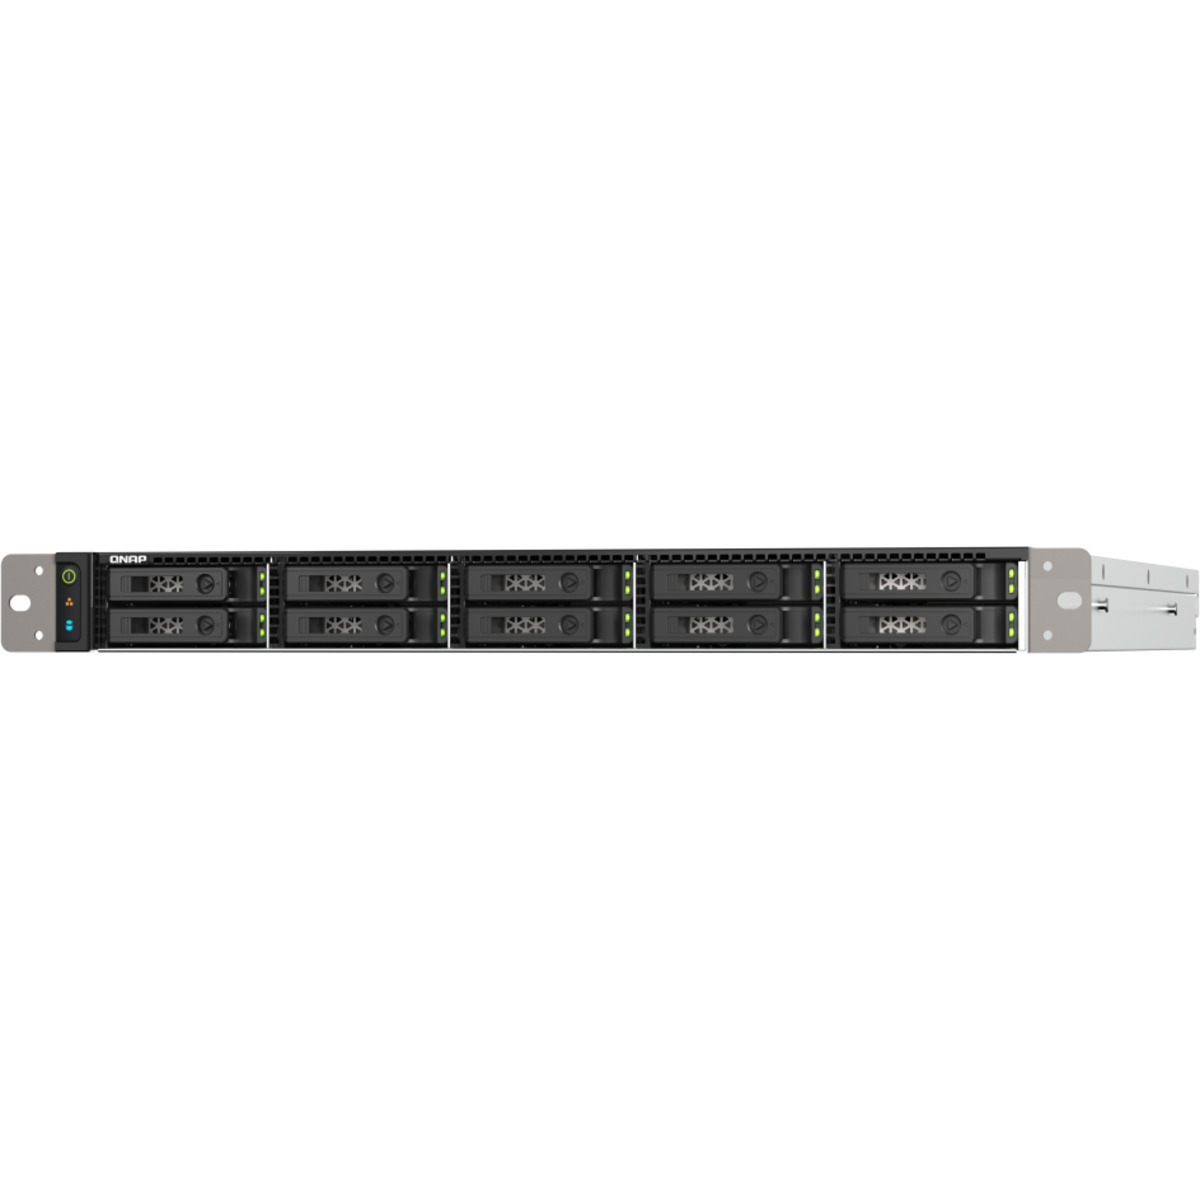 QNAP TS-h1090FU-7302P 80tb 10-Bay RackMount Large Business / Enterprise NAS - Network Attached Storage Device 10x8tb Sabrent Rocket 4 Plus SB-RKT4P-8TB  7100/6000MB/s M.2 2280 NVMe SSD CONSUMER Class Drives Installed - Burn-In Tested TS-h1090FU-7302P